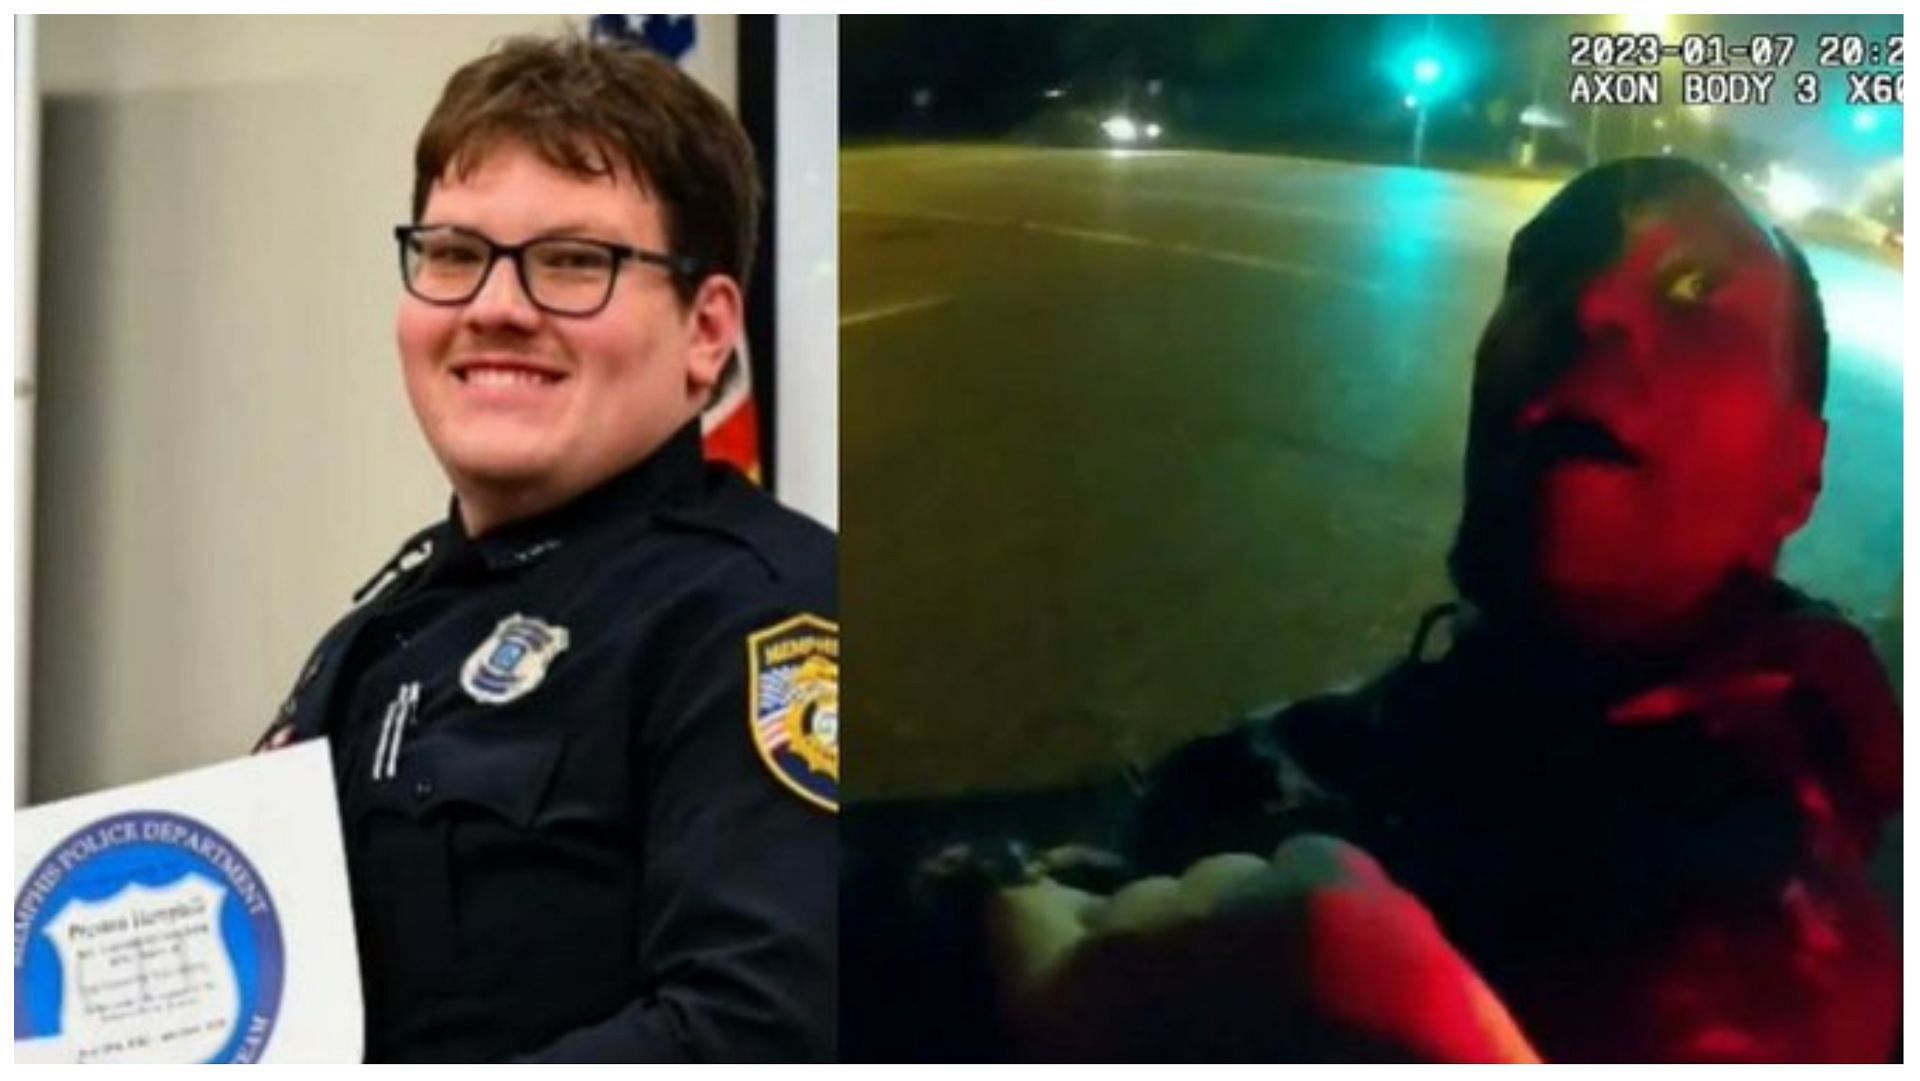 A sixth cop, Preston Hemphill (left) was also fired for violating department policies, (Image via @tariqnasheed/Twitter)